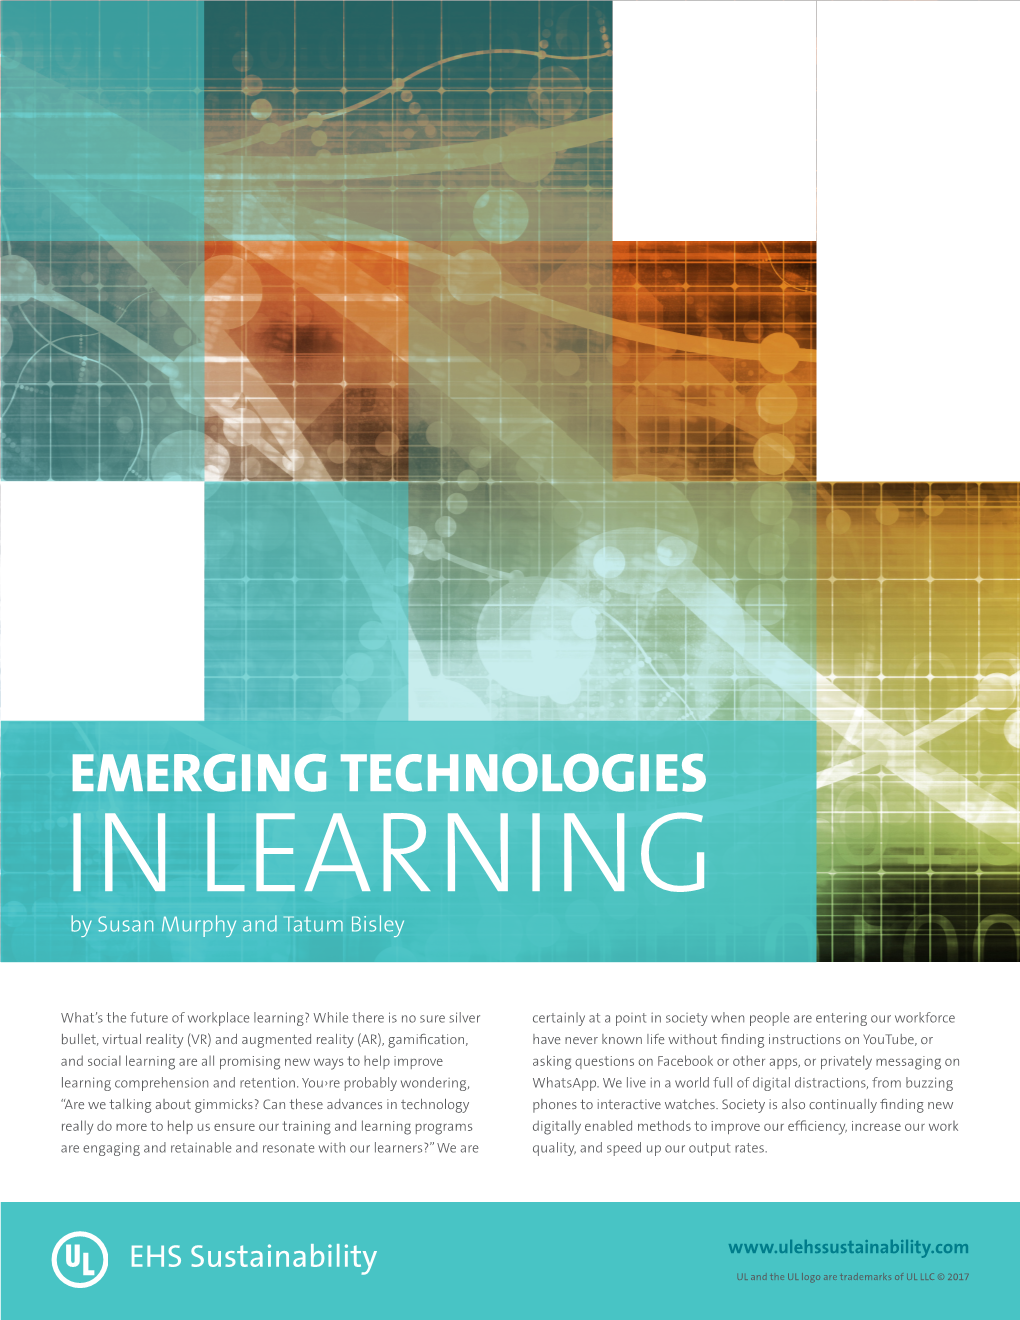 EMERGING TECHNOLOGIES in LEARNING by Susan Murphy and Tatum Bisley